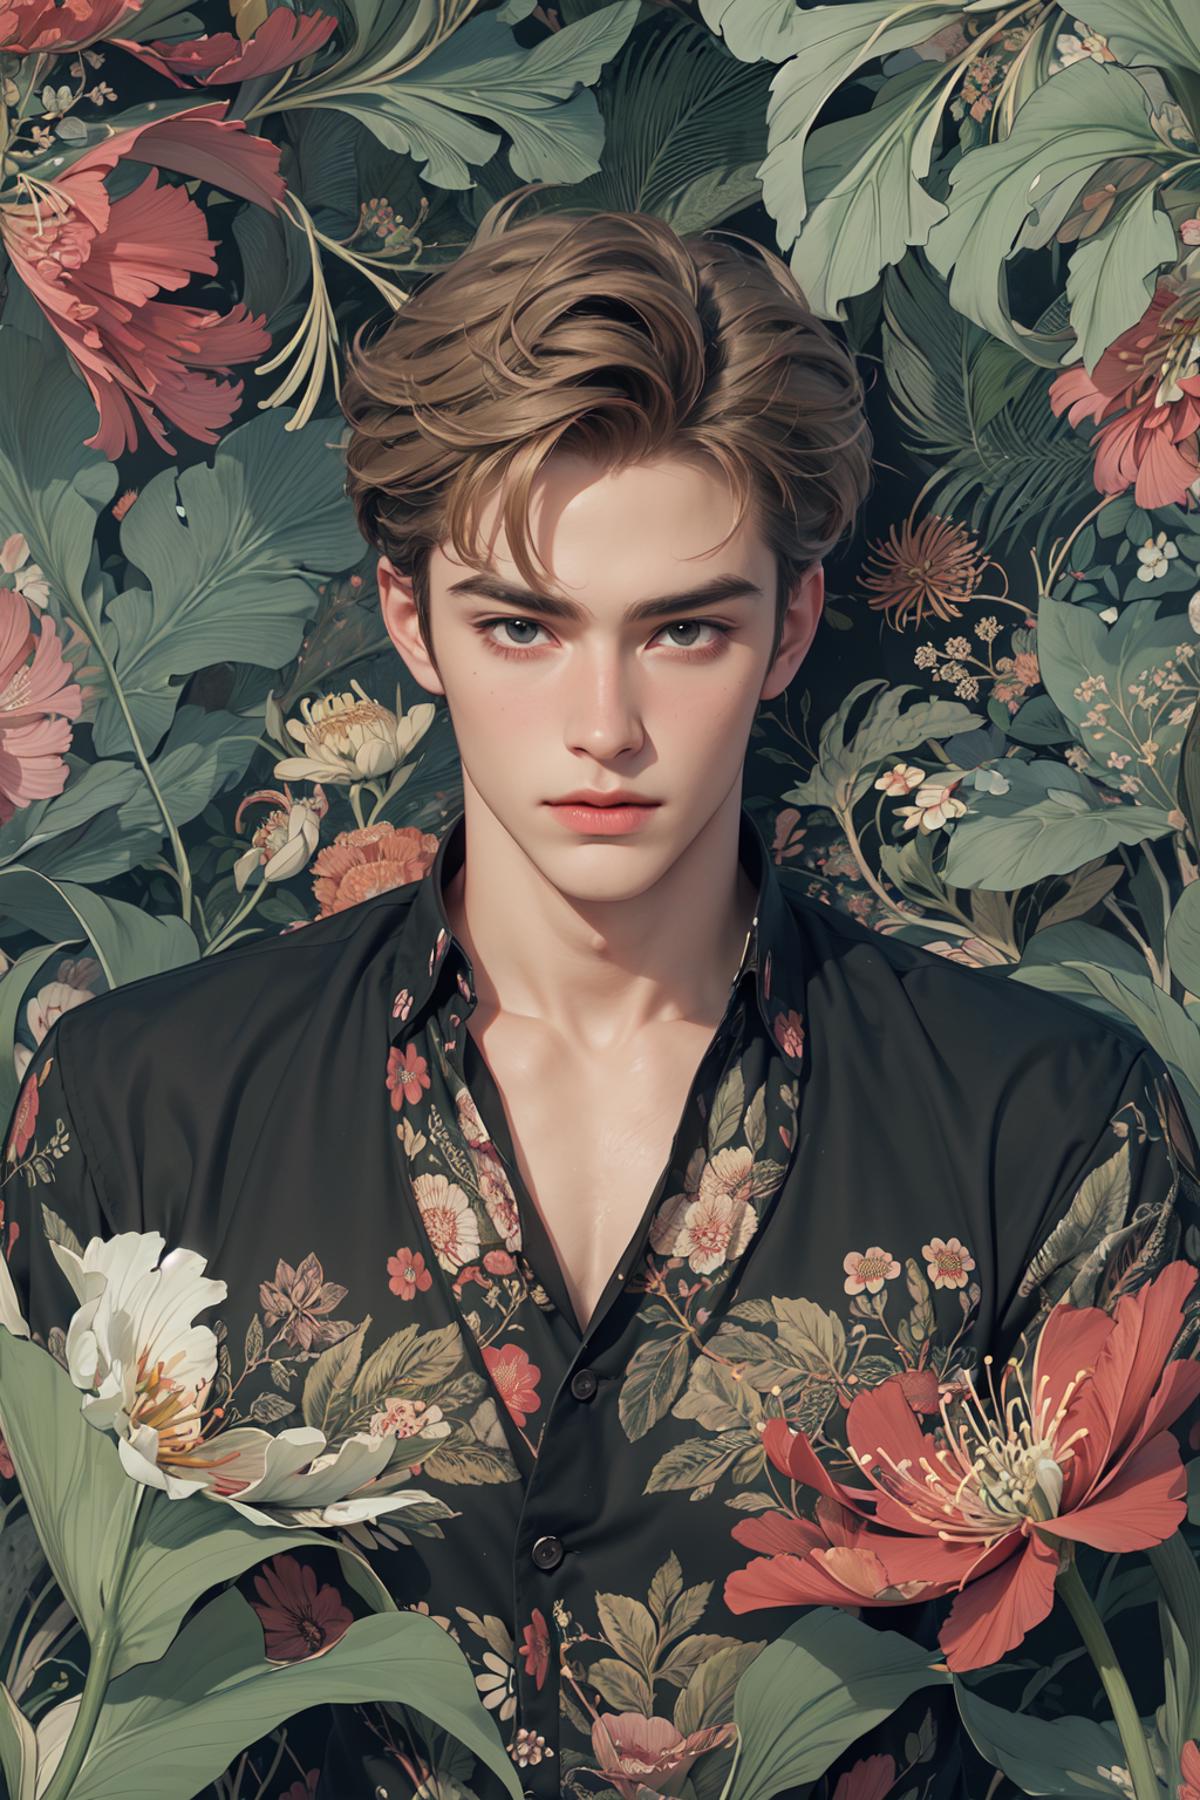 A handsome young man with brown hair and a flowered shirt.